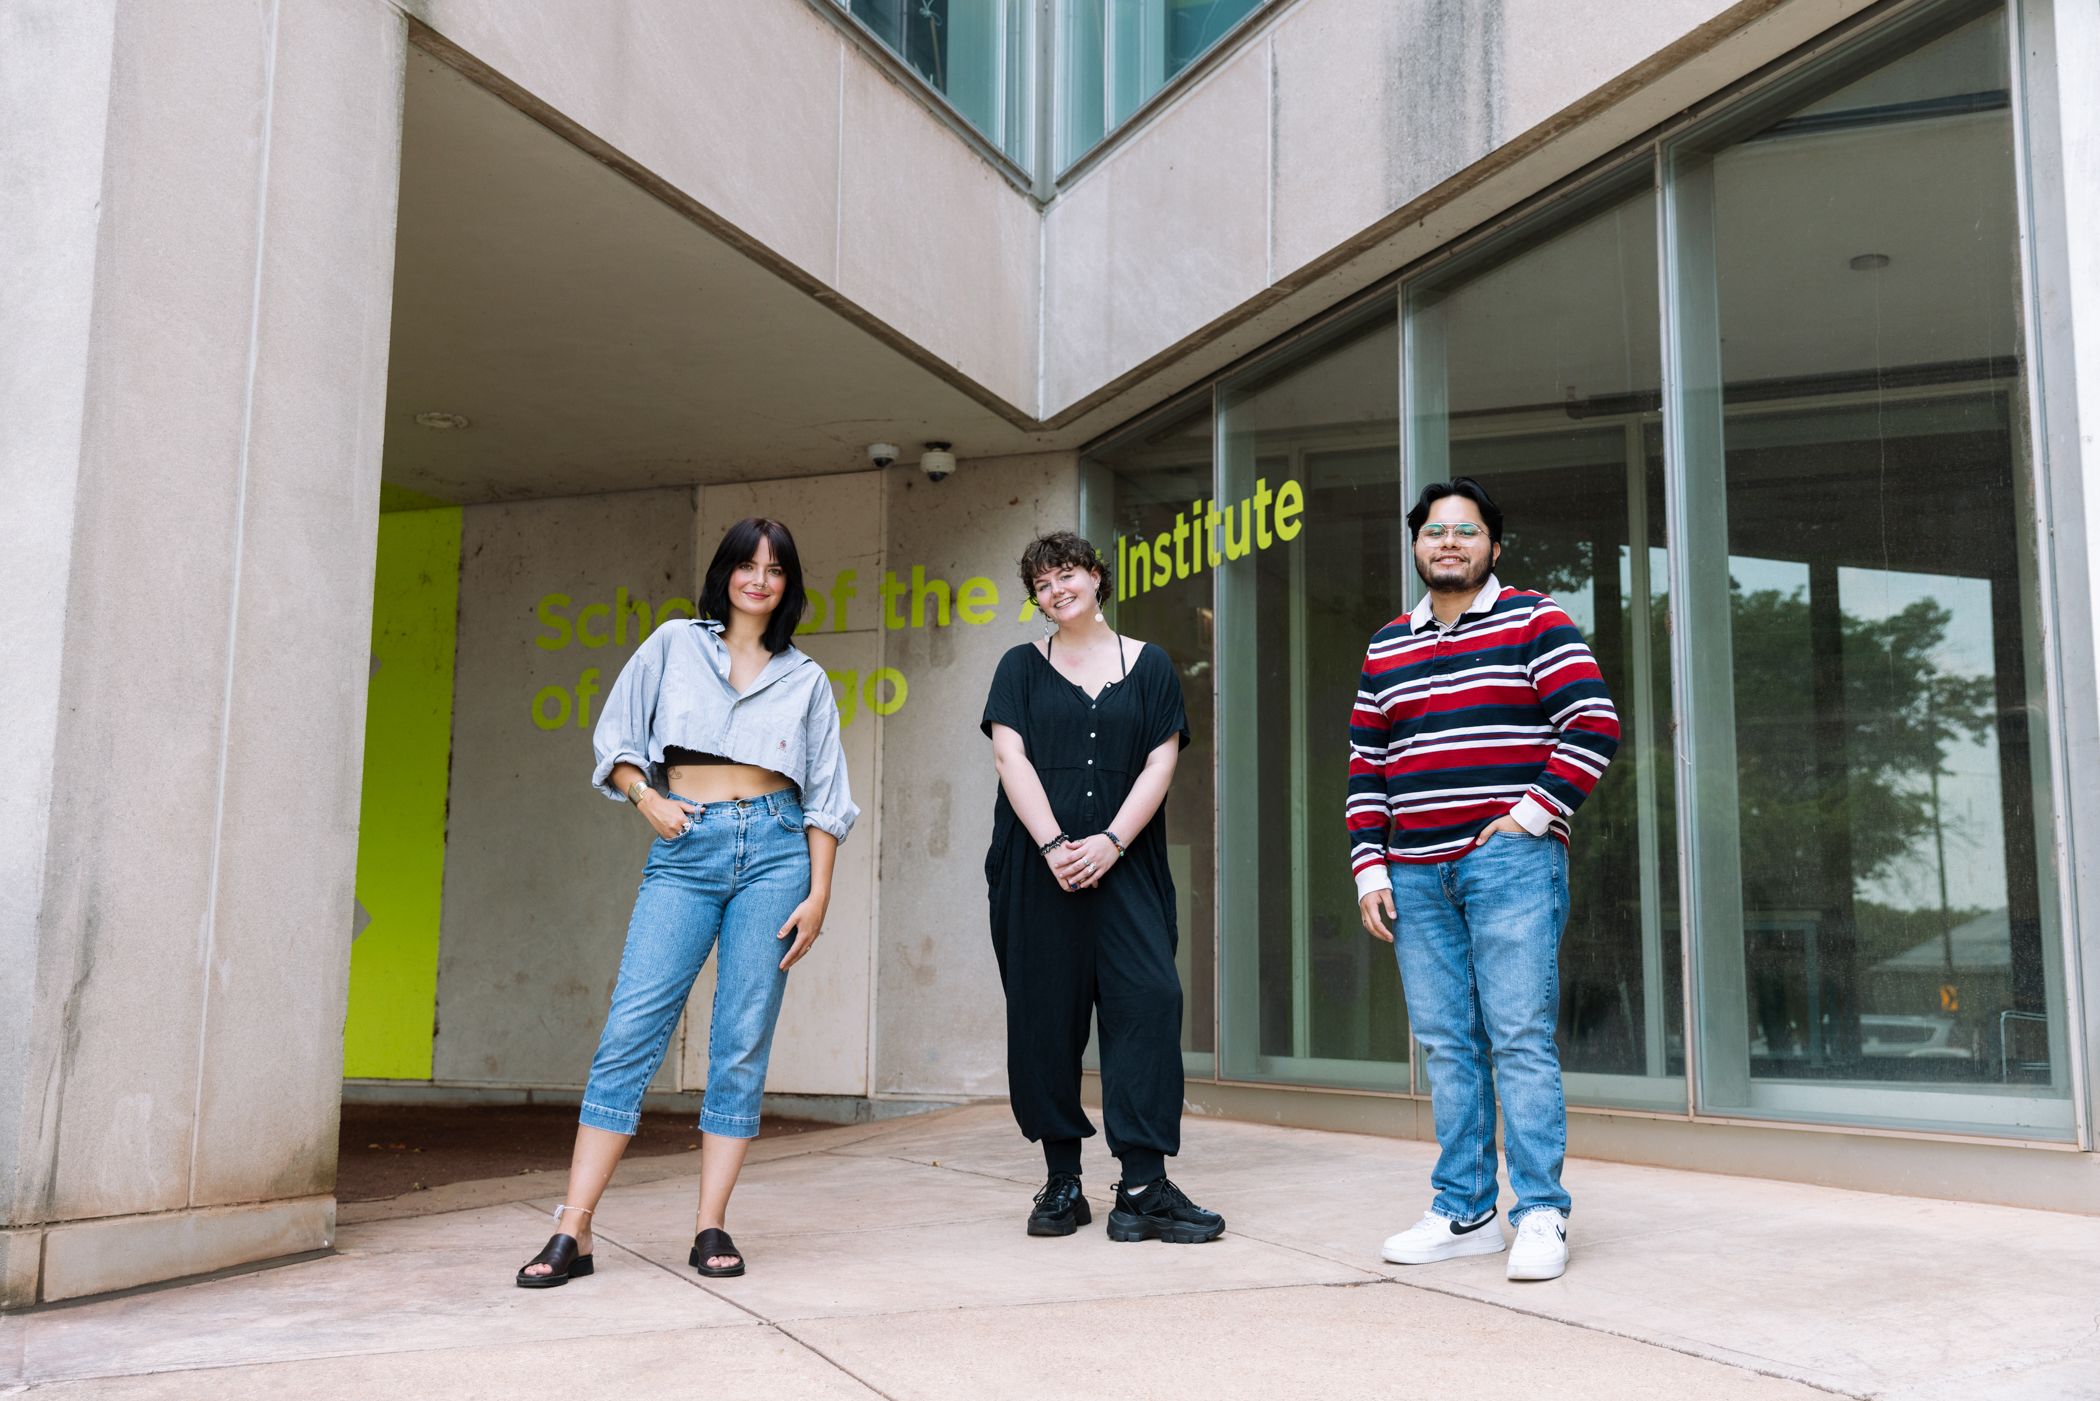 Three students stand outside a modern concrete building with School of the Art Institute of Chicago etched on the wall and glass